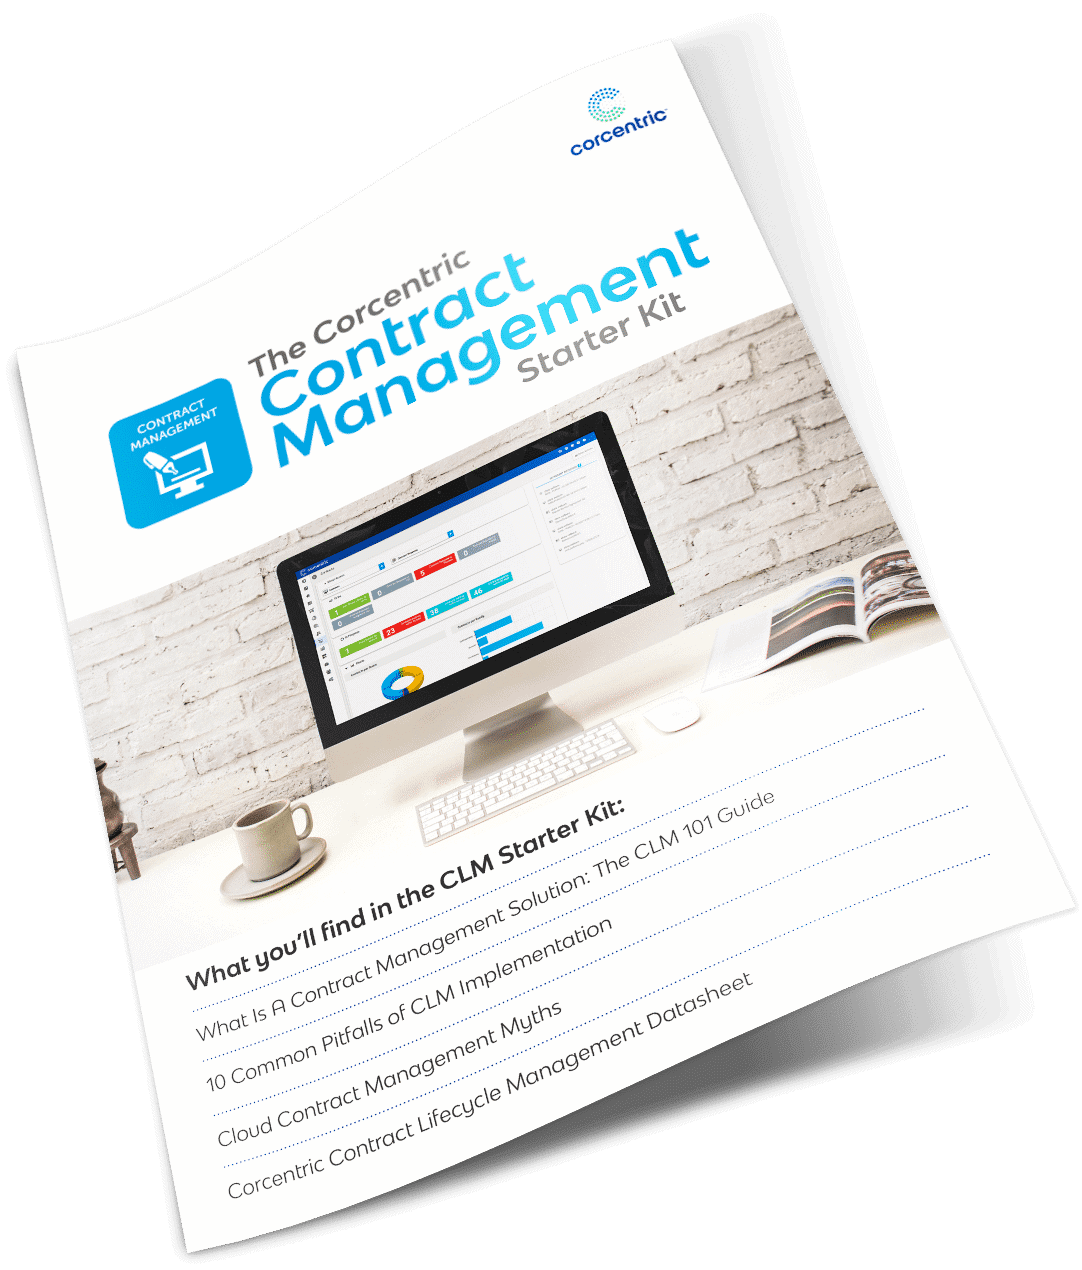 Corcentric White Paper: Contract Management Starter Kit